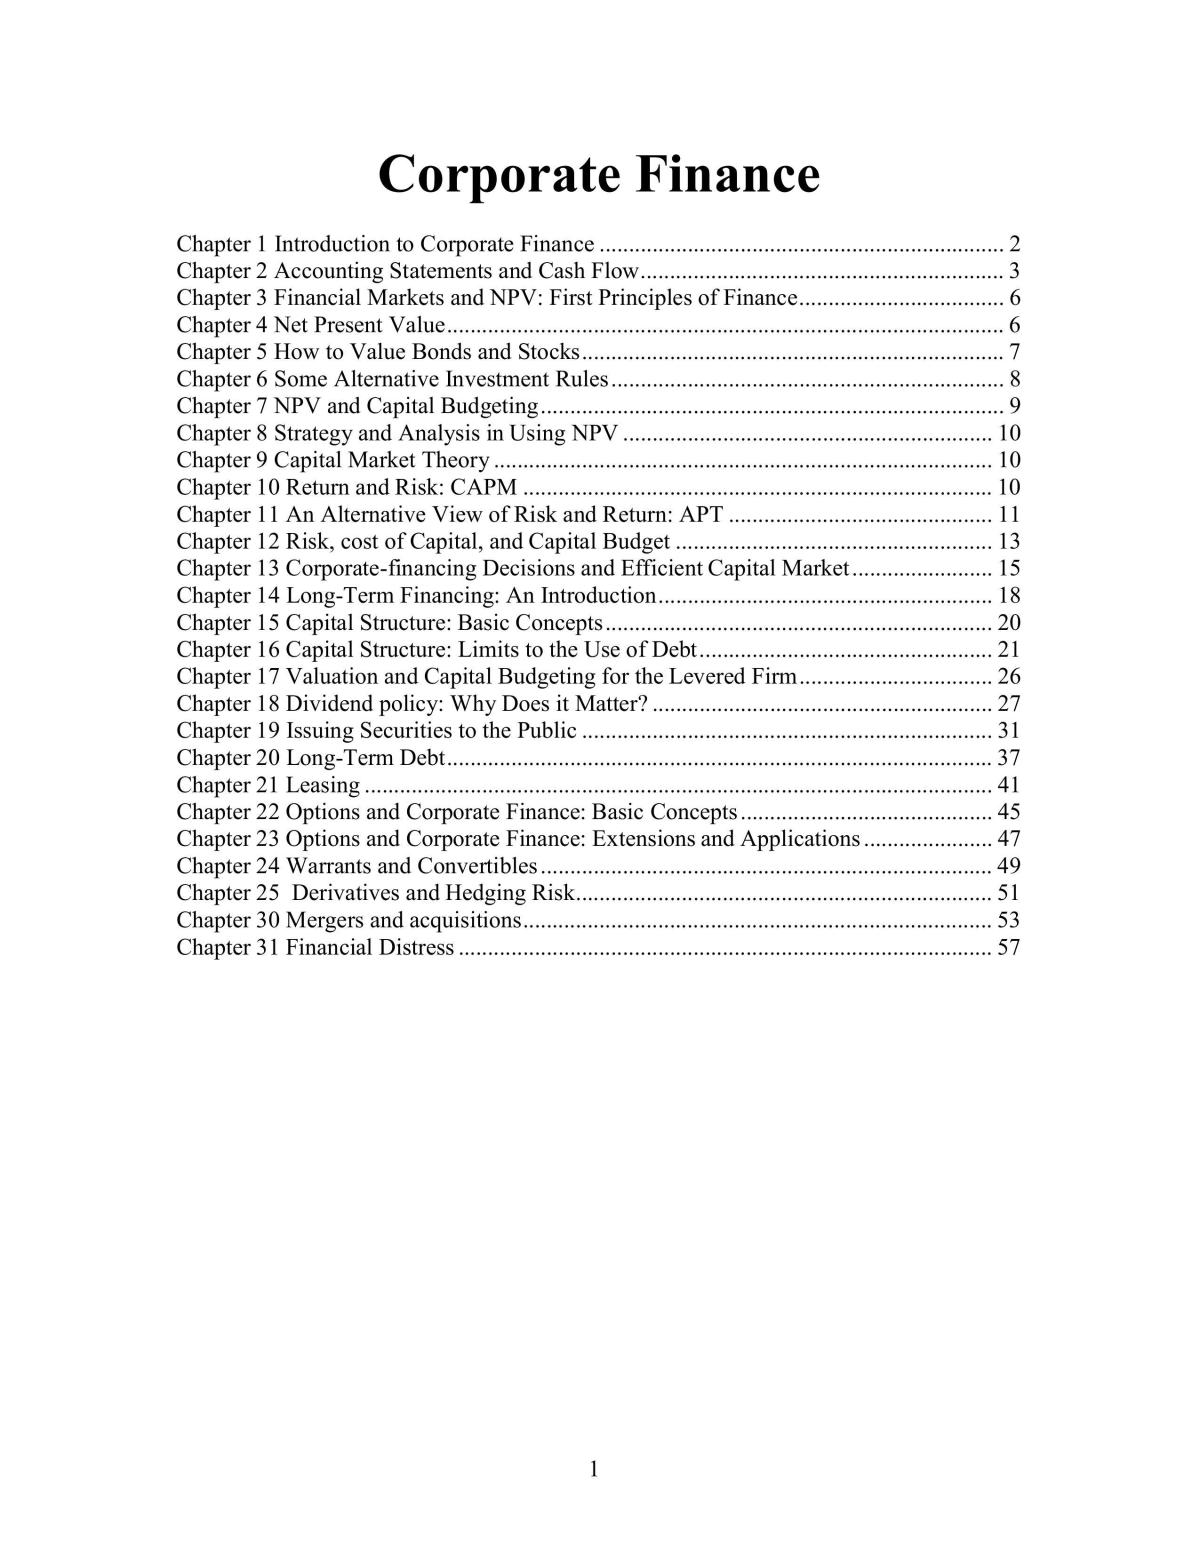 Study notes of Corporate Finance - Page 1